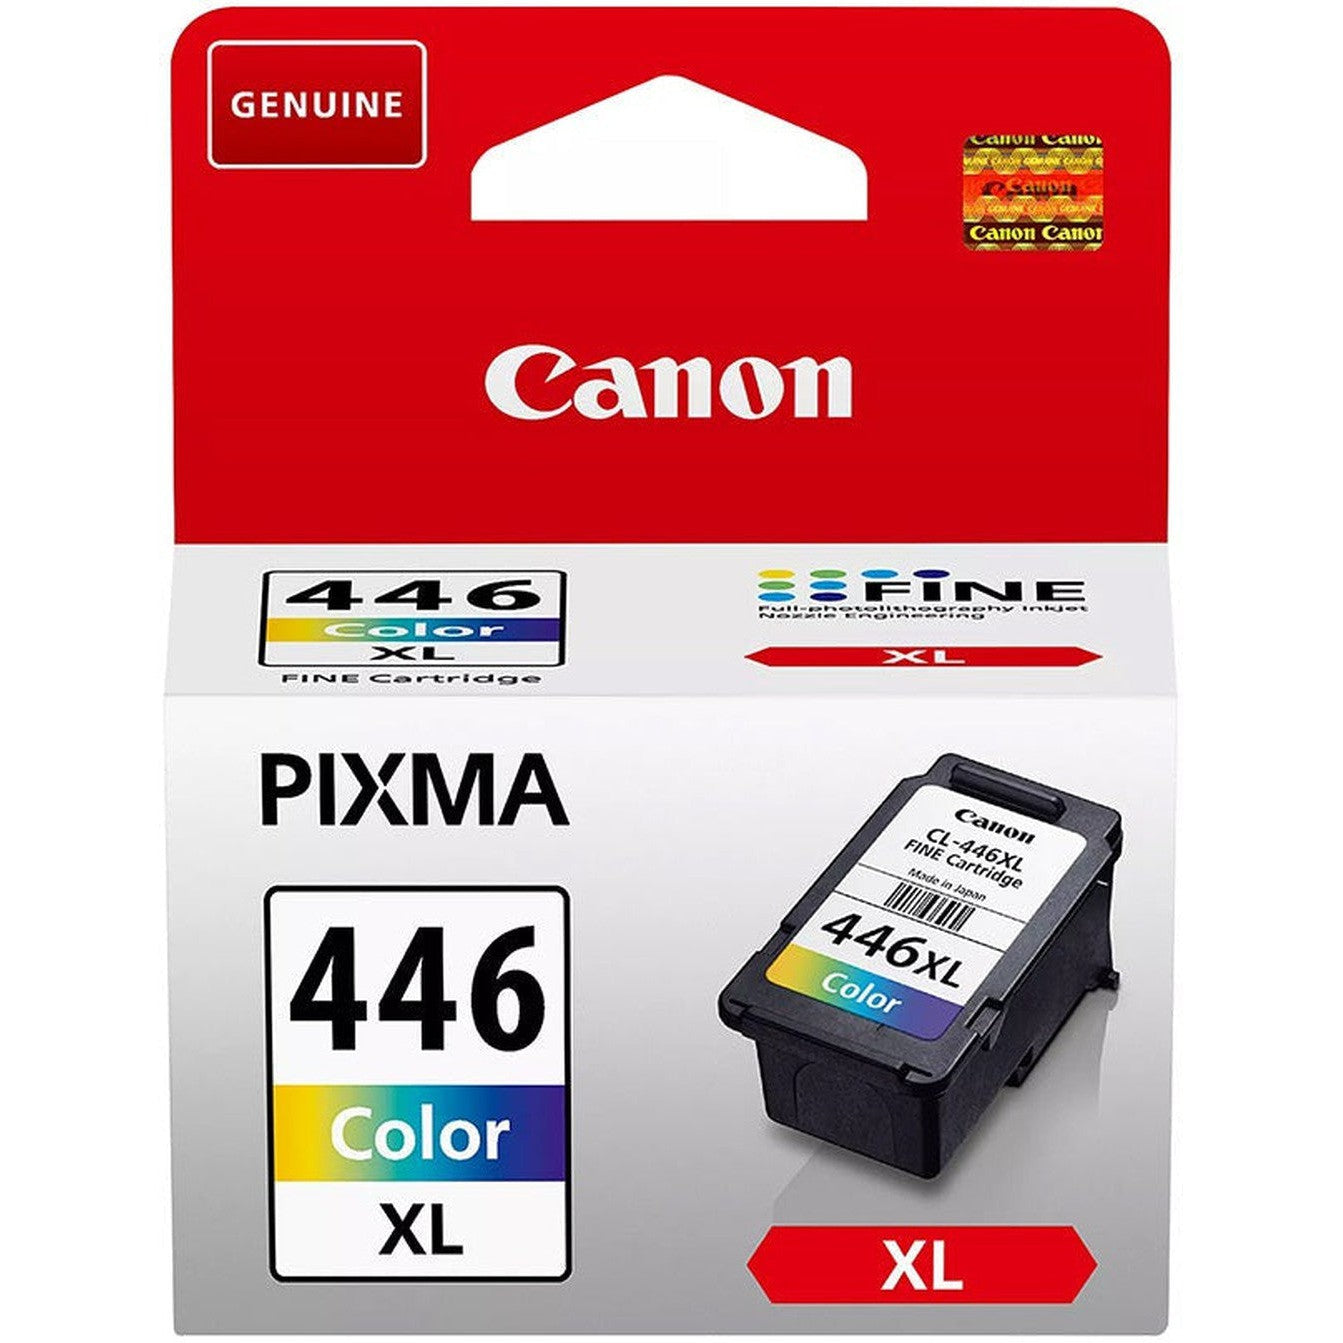 Canon Cl 446 Xl High Yield C/M/Y Colour Ink Cartridge-Inks And Toners-Canon-Star Light Kuwait